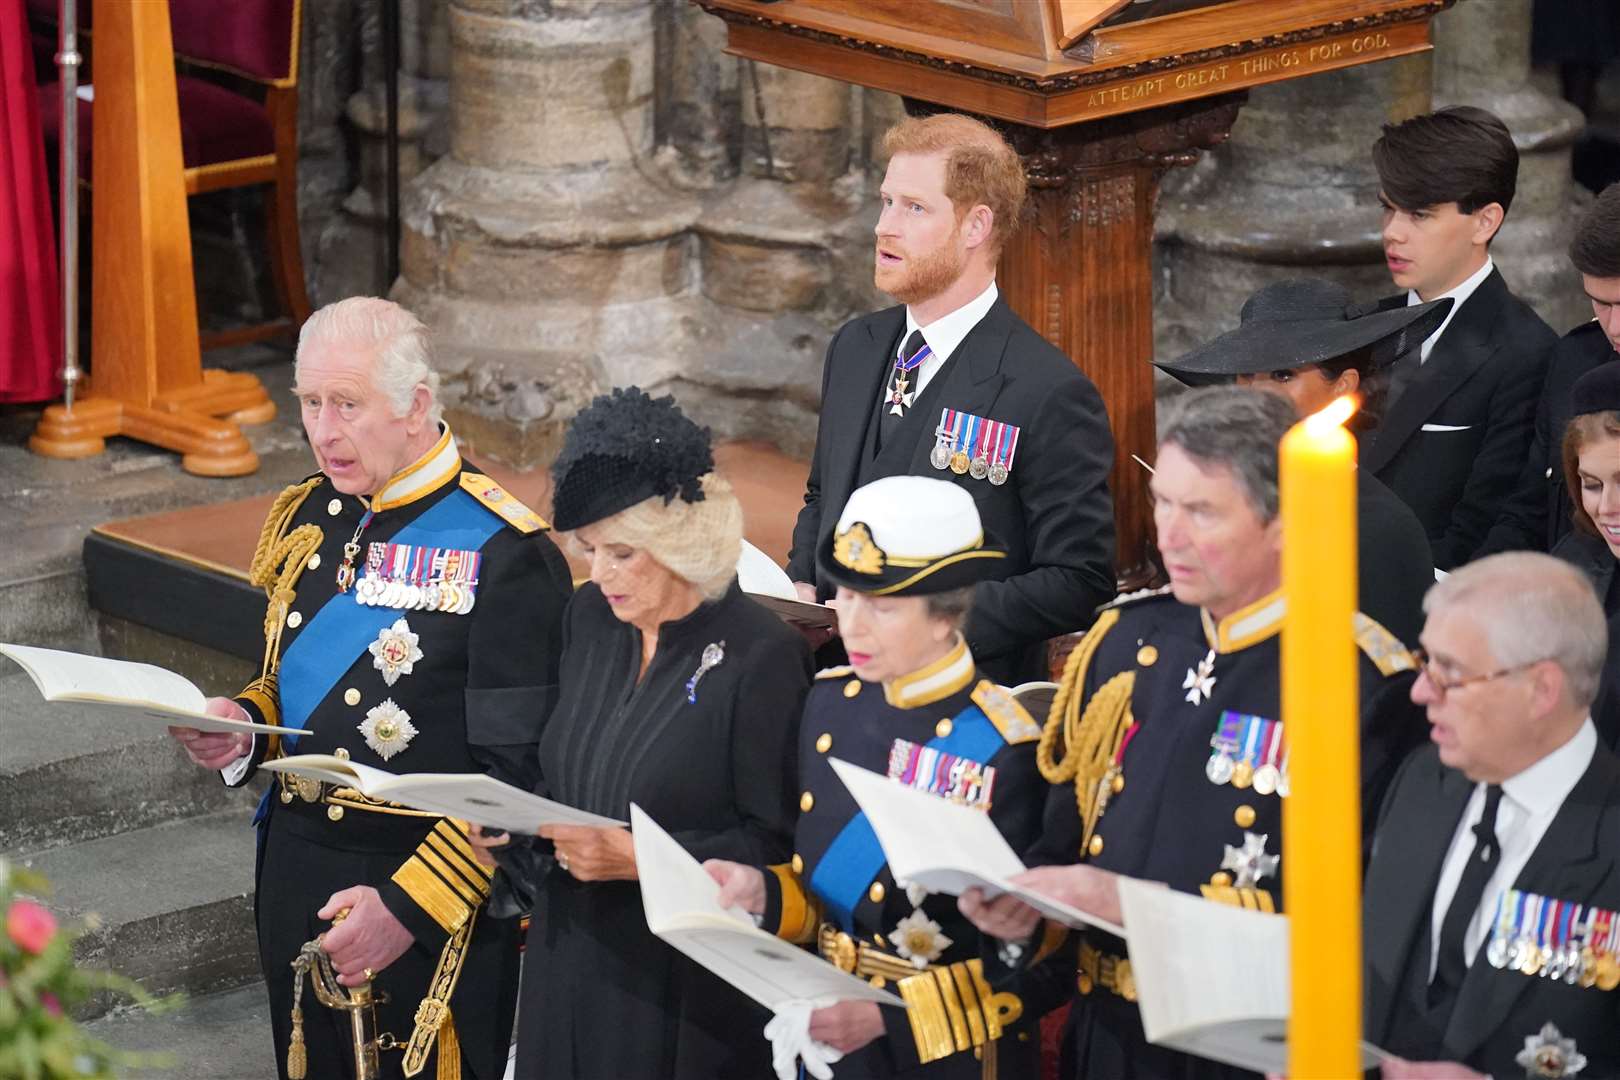 The Duke of Sussex at the Queen’s funeral (Dominic Lipinski/PA)